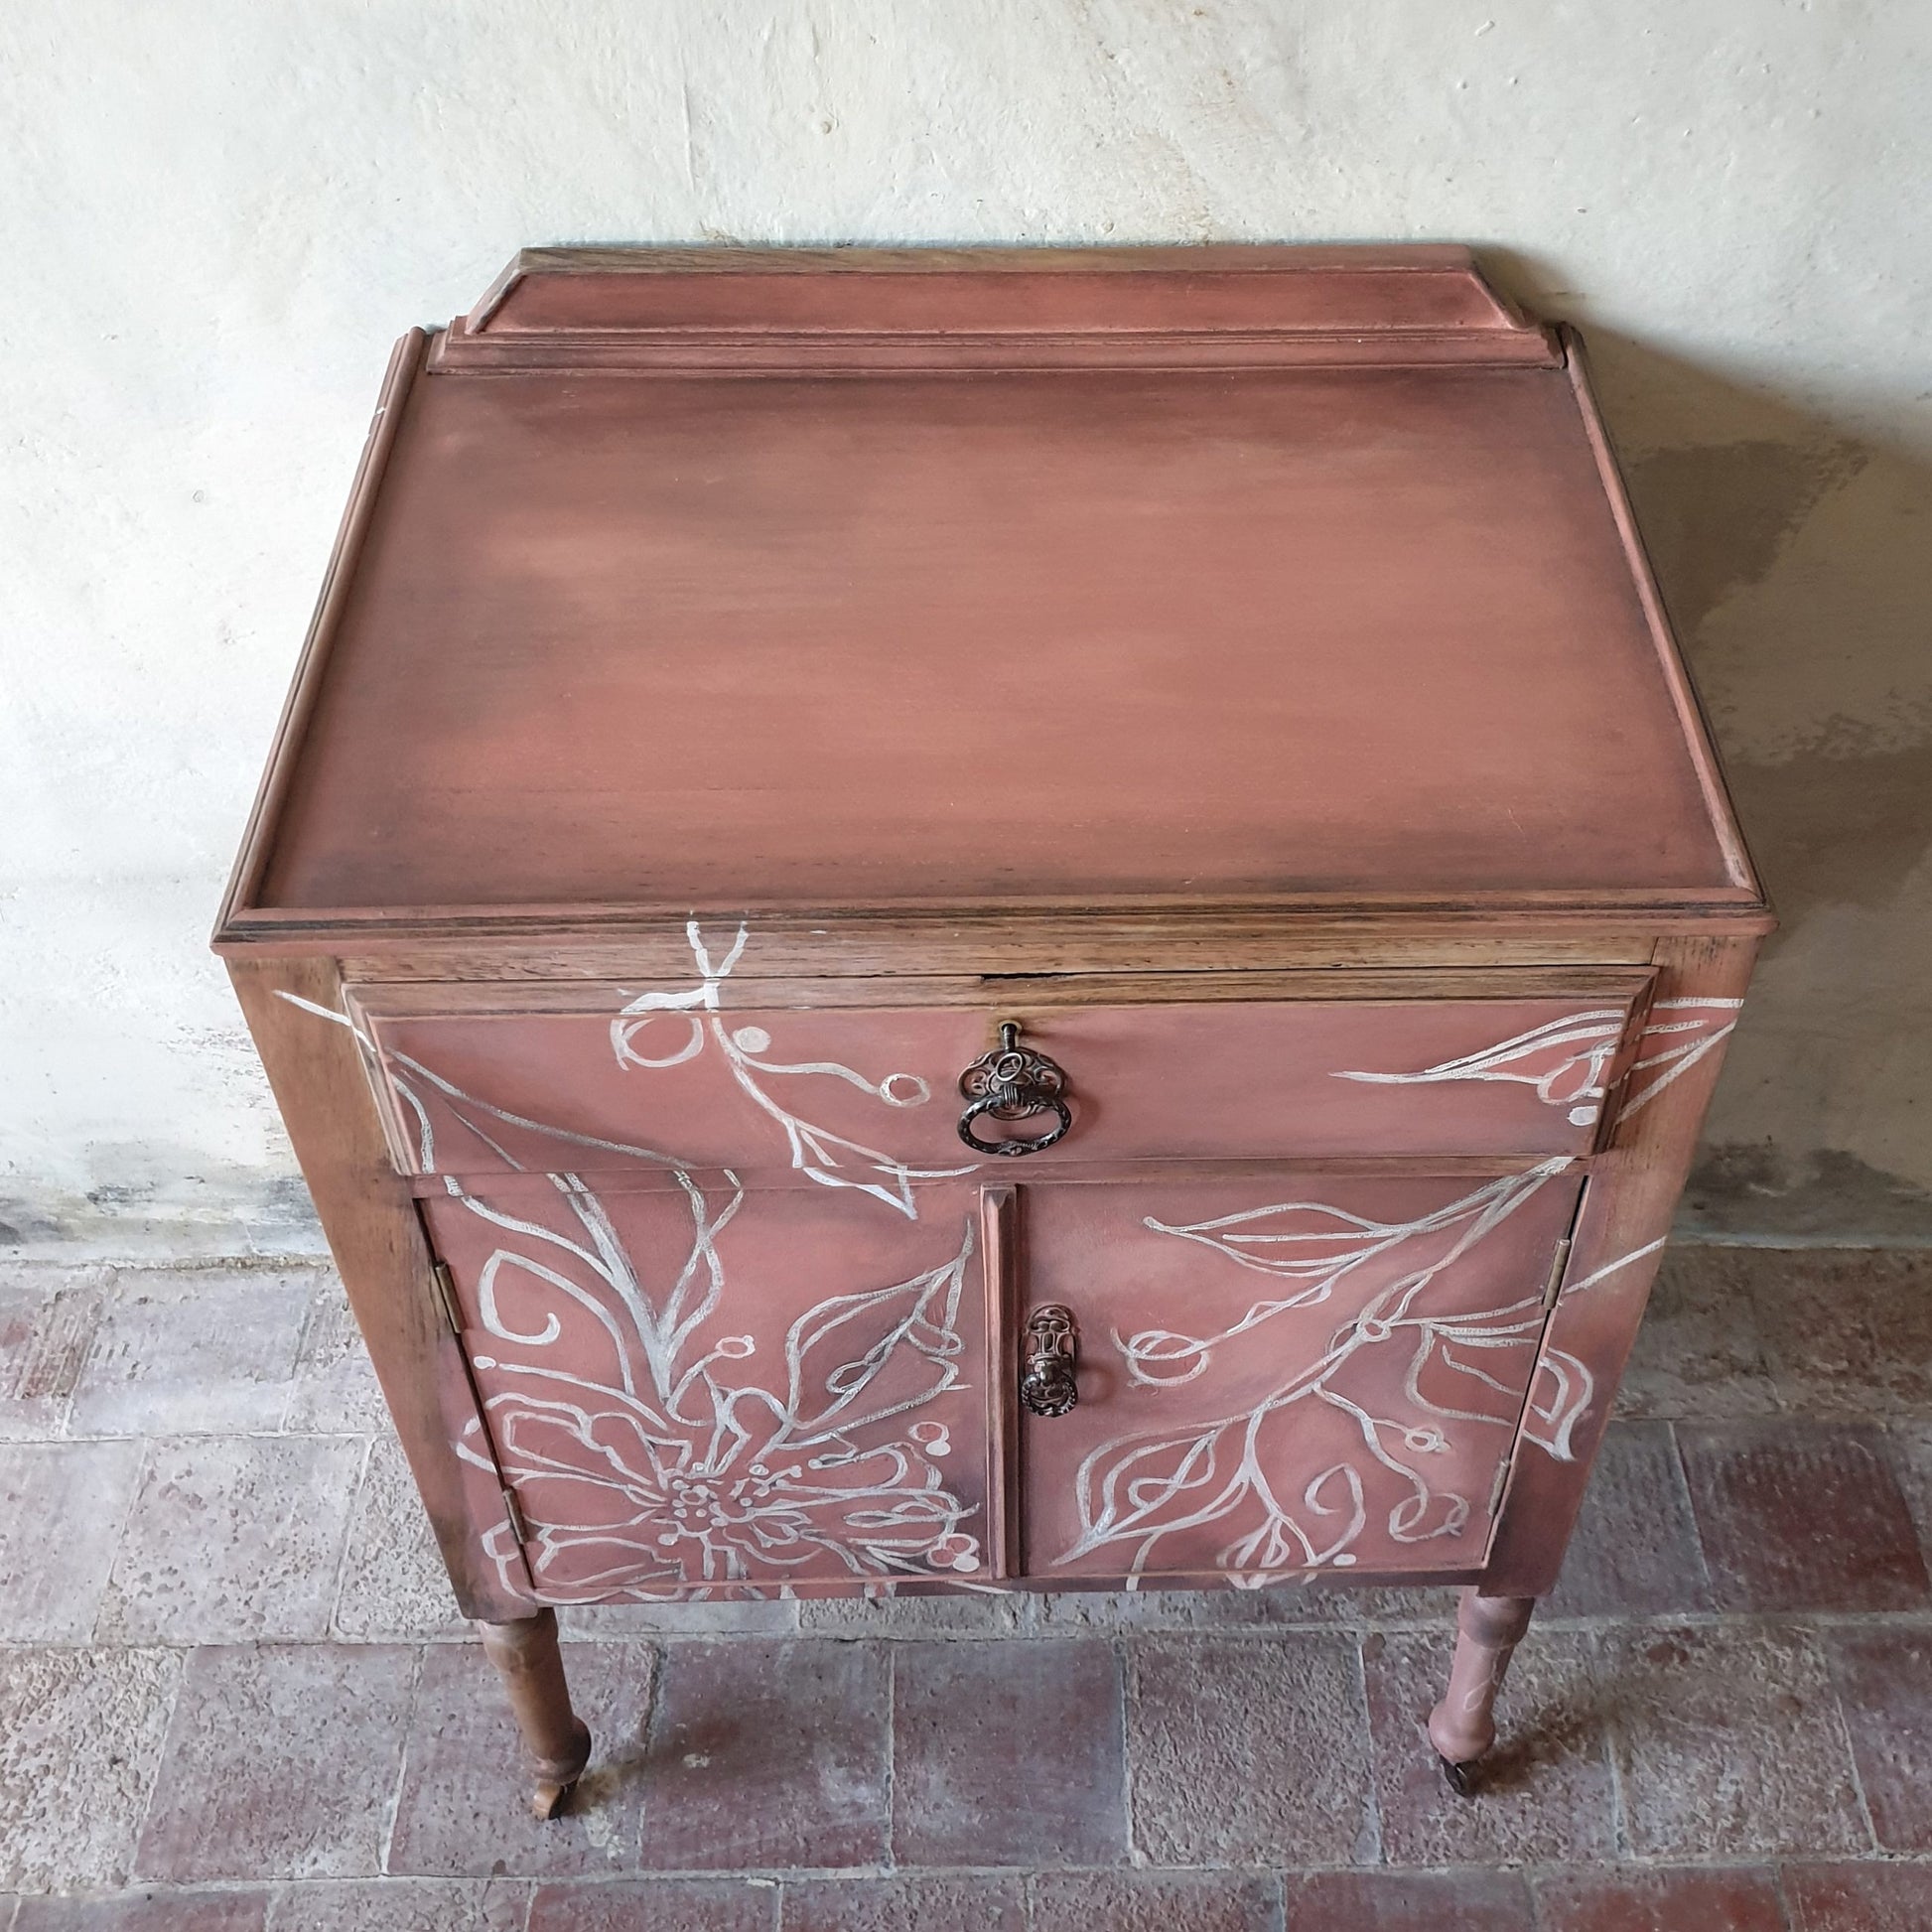 1930’s Oak Cabinet featuring a hand painted freeform floral design in white.